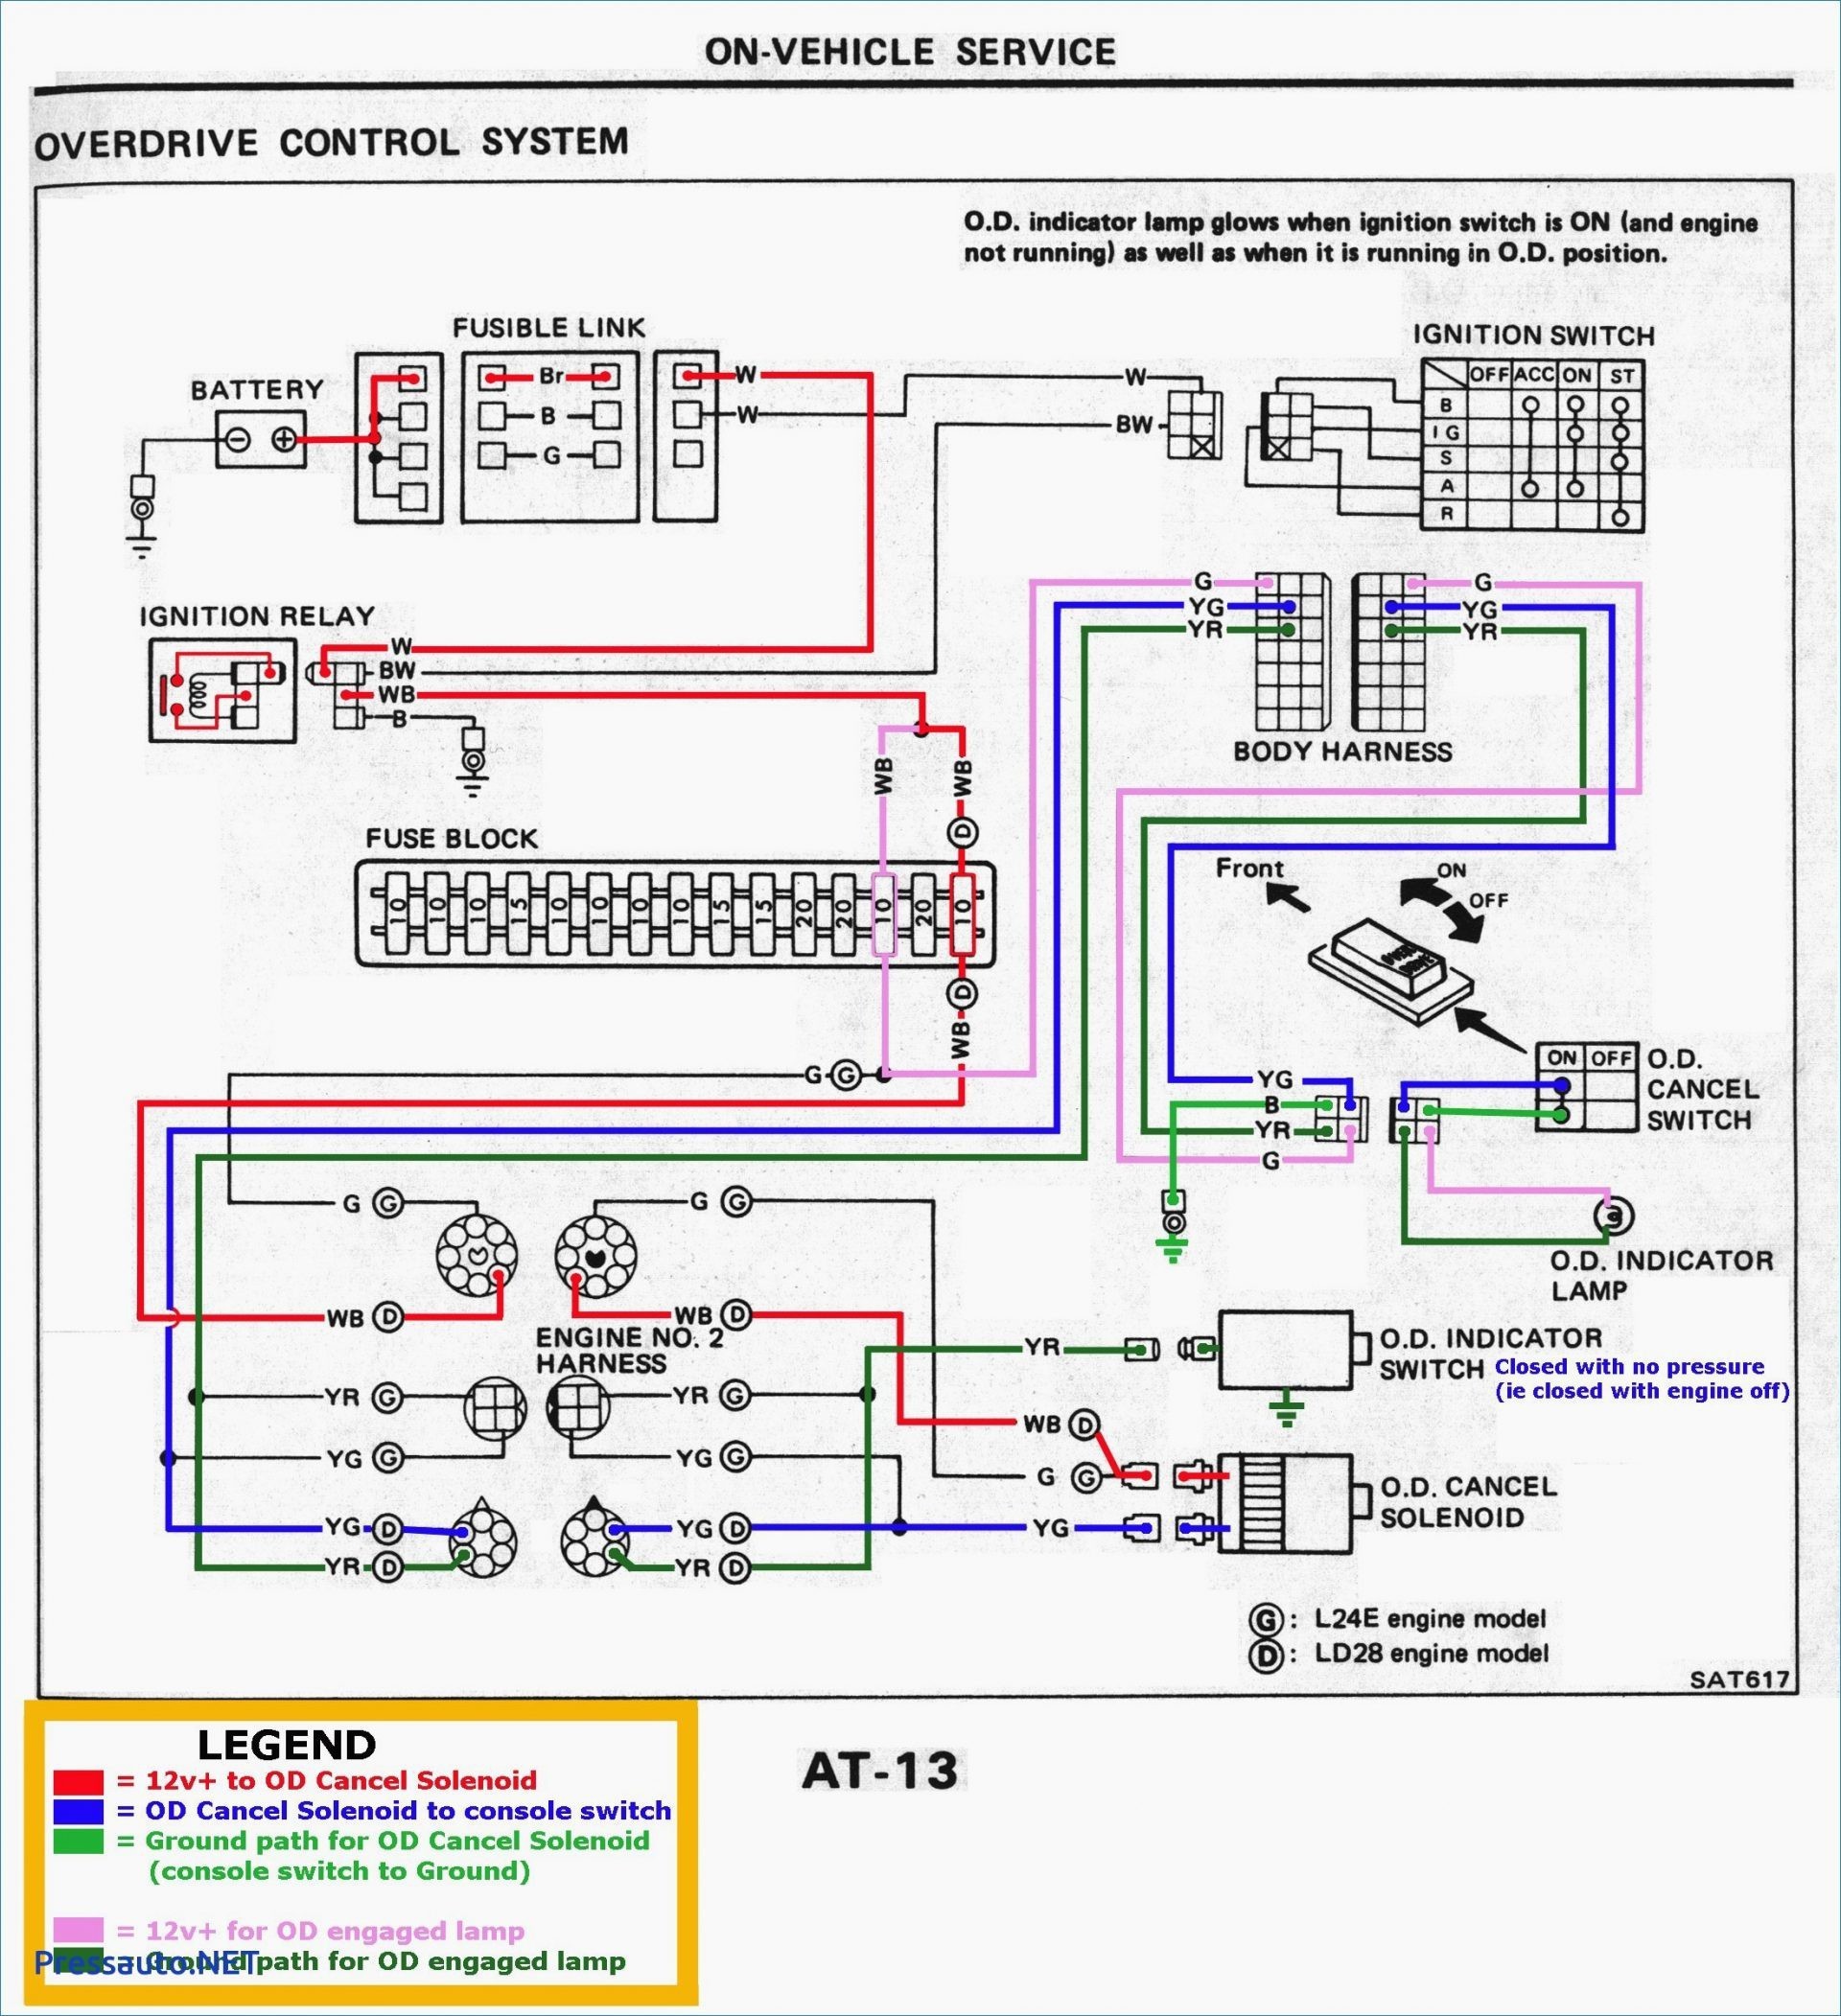 Trailer Wiring Diagram with Electric Brakes 2009 toyota Ta A Trailer Wiring Diagram Sample Of Trailer Wiring Diagram with Electric Brakes